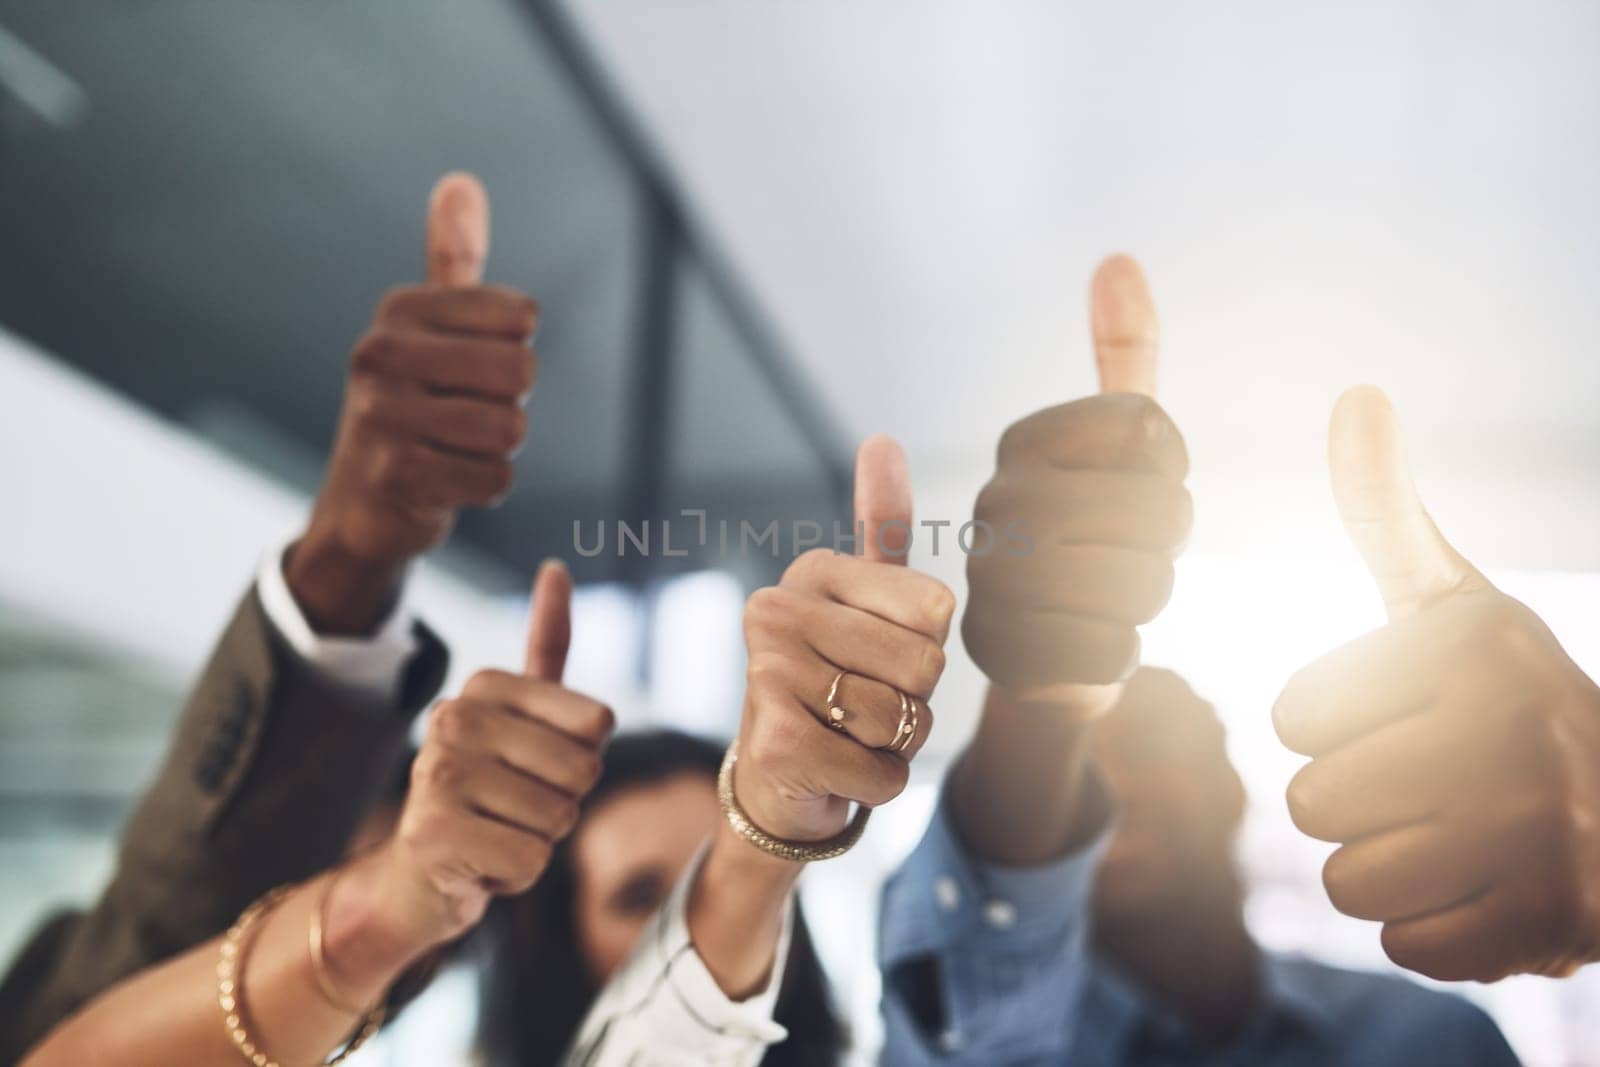 You should be proud of your achievements. Closeup shot of a group of businesspeople showing thumbs up in an office